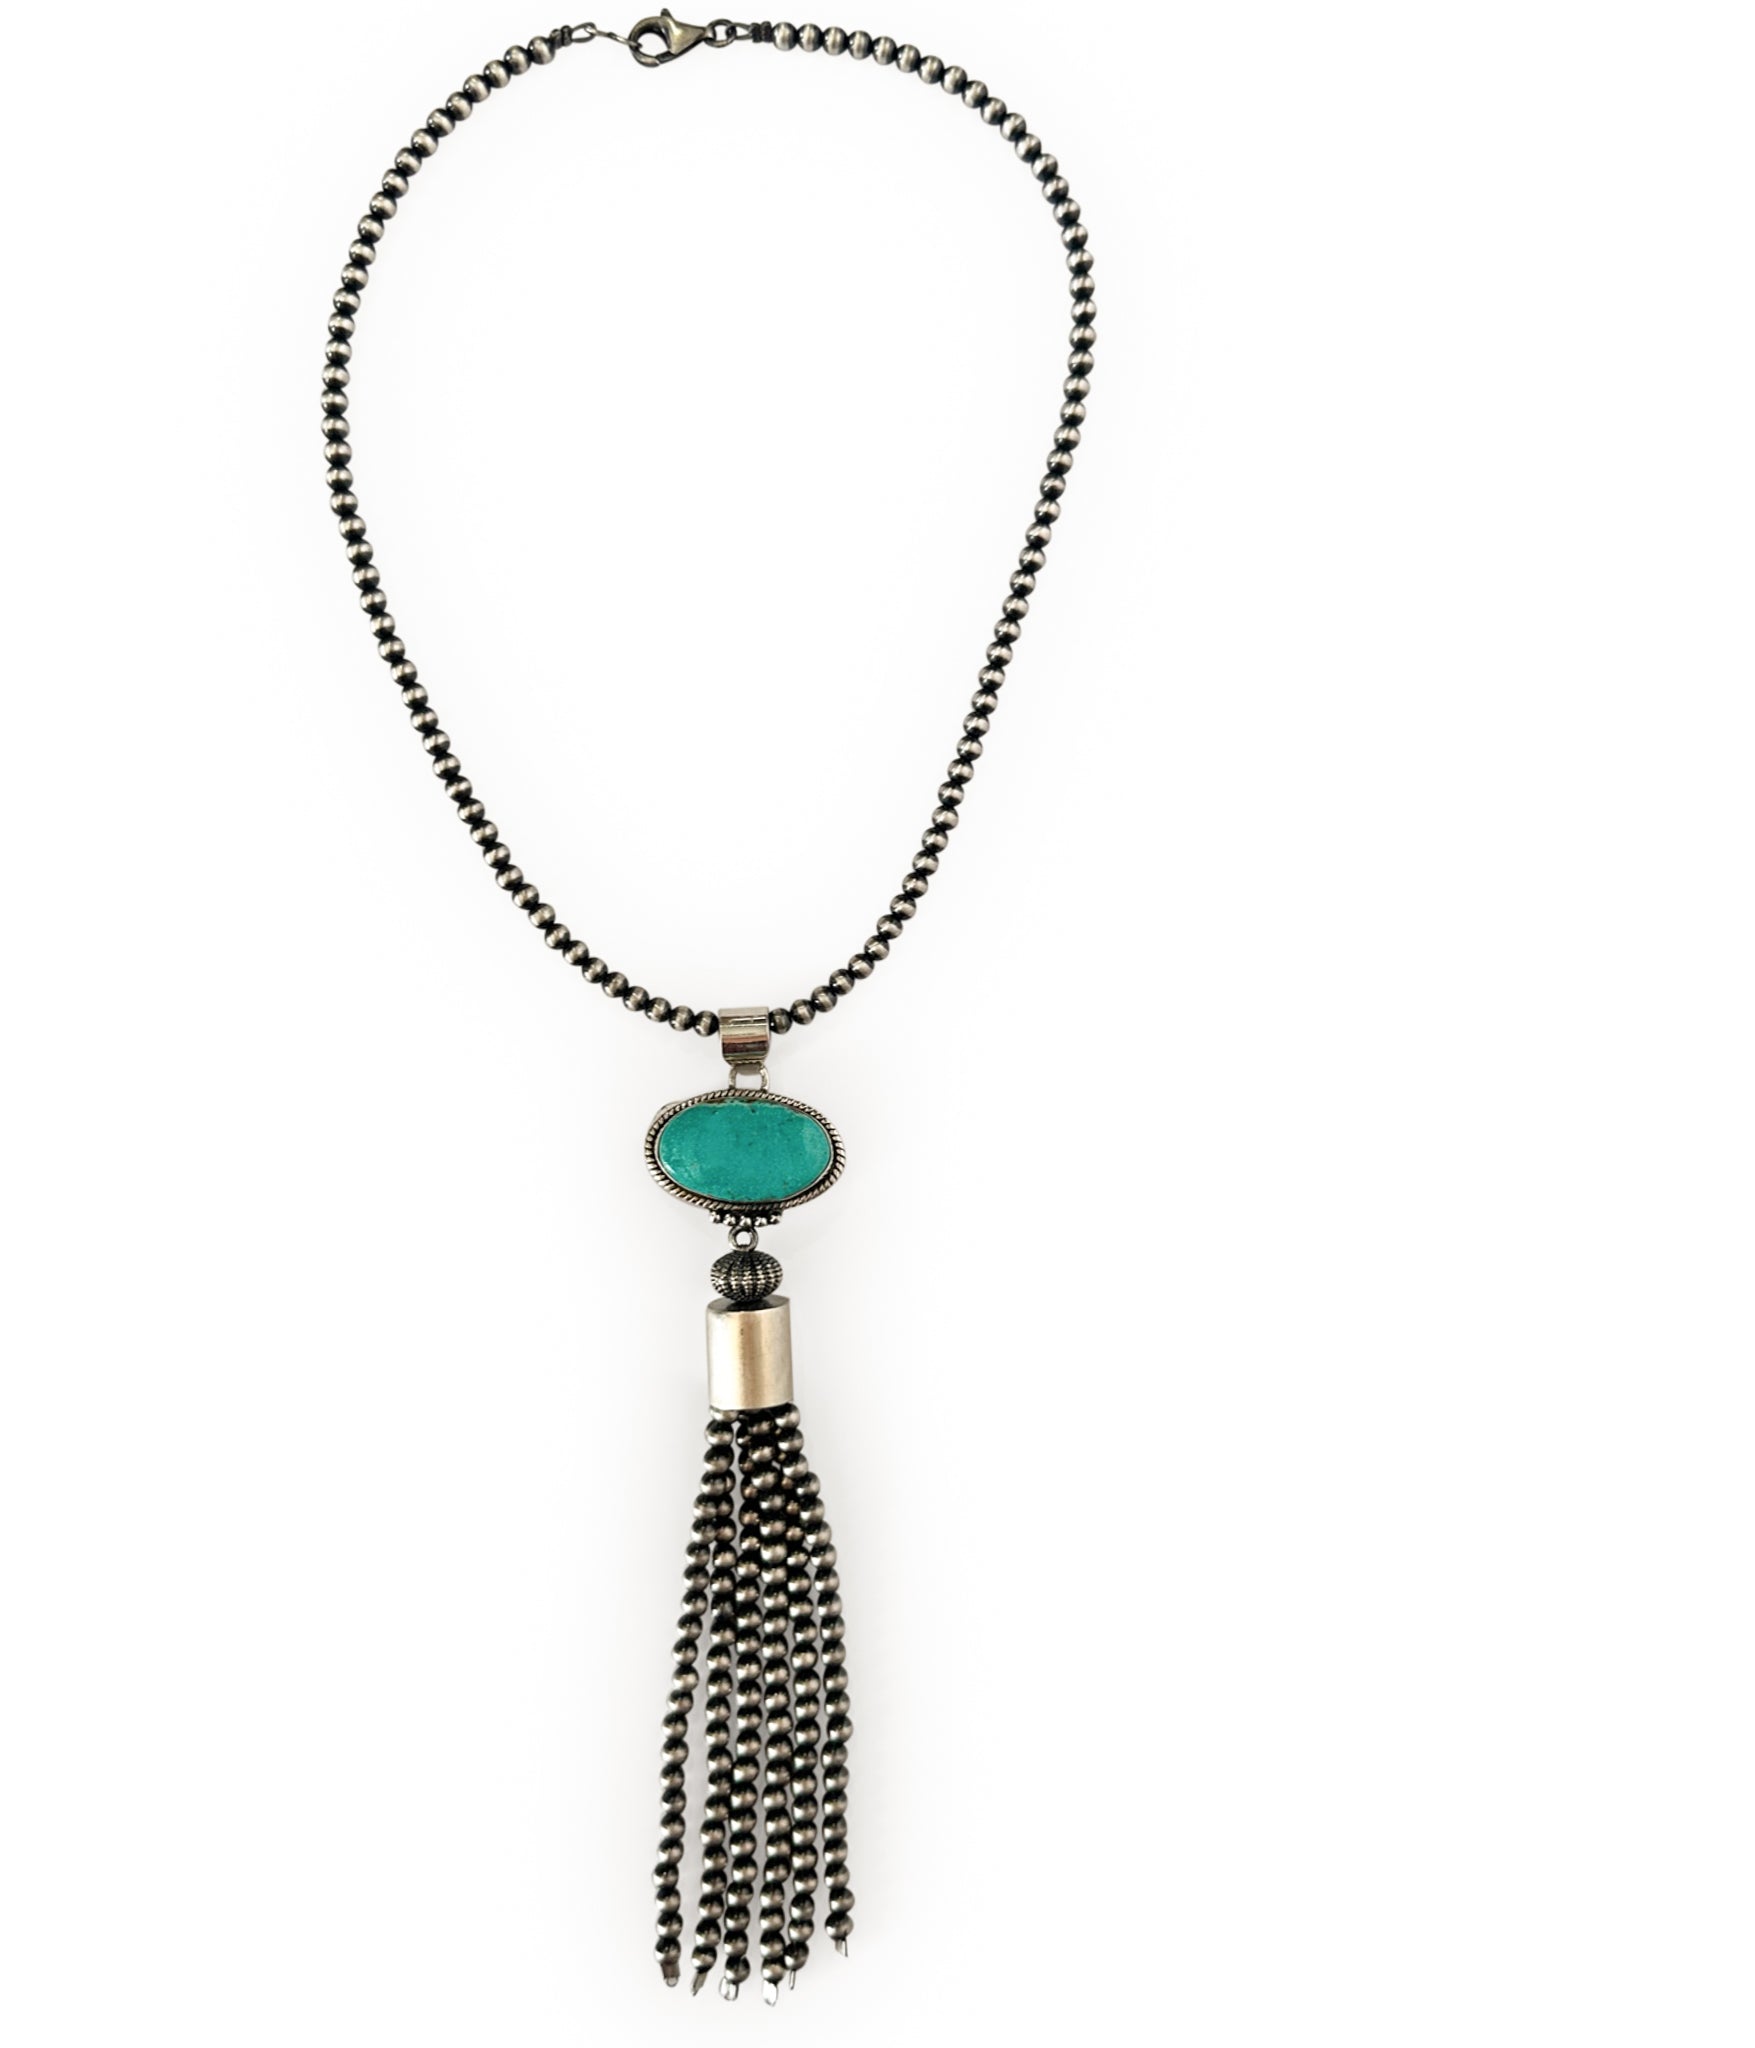 Arrey Sterling Silver Necklace with Authentic Turquoise Pendent